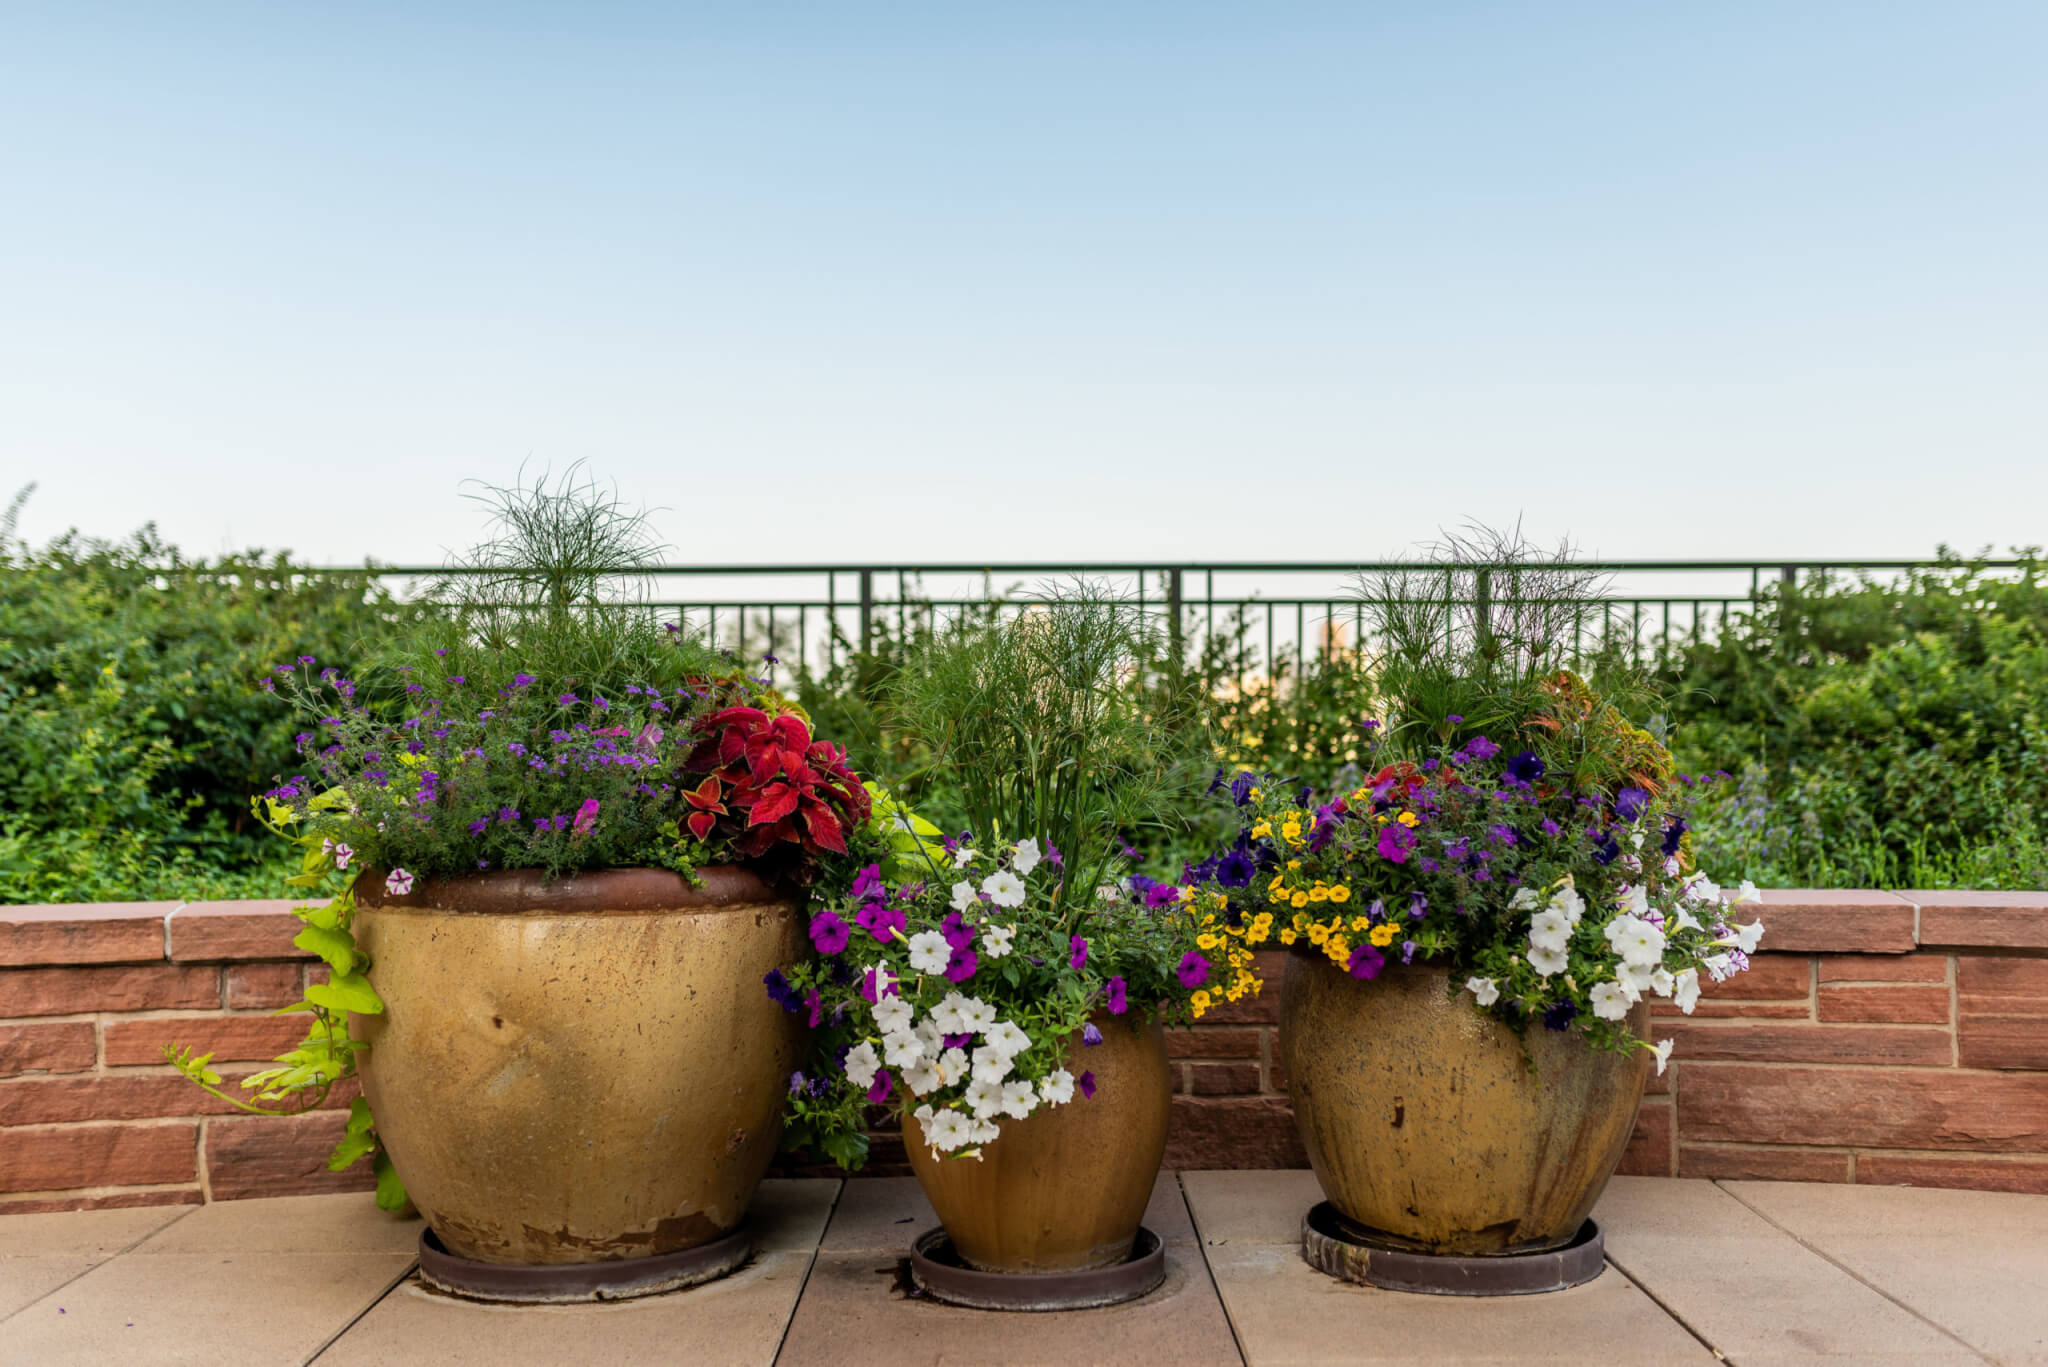 A big flower pots filled with different types of plants and colour flower plants